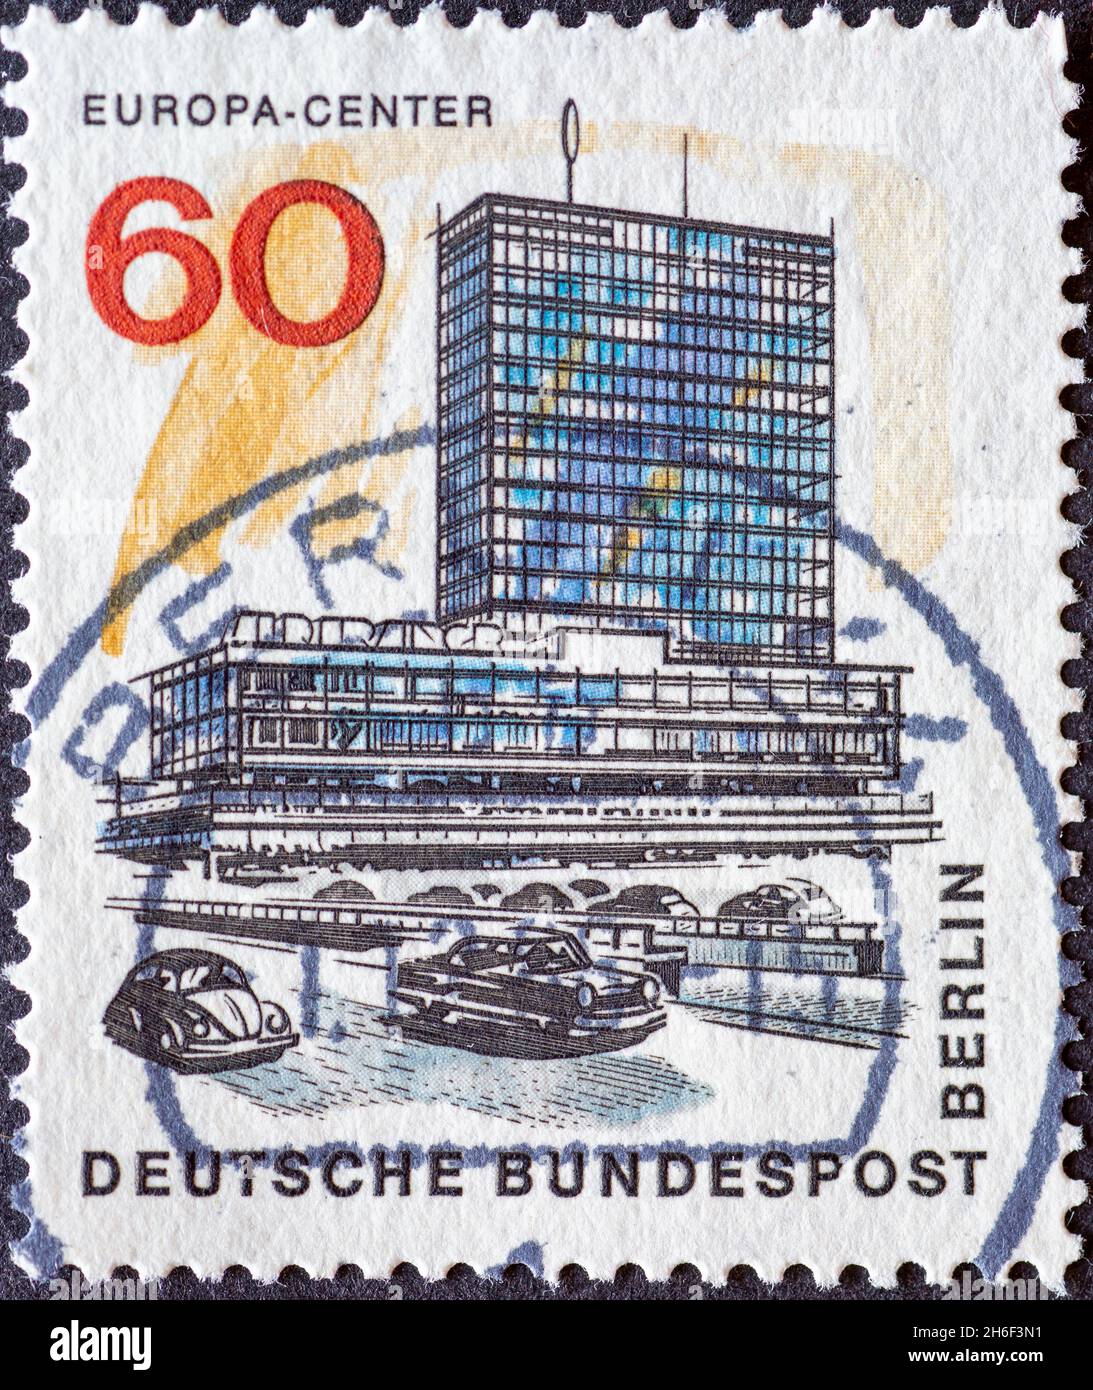 GERMANY, Berlin - CIRCA 1965: a postage stamp from Germany, Berlin showing a series the new Berlin: europe center Stock Photo